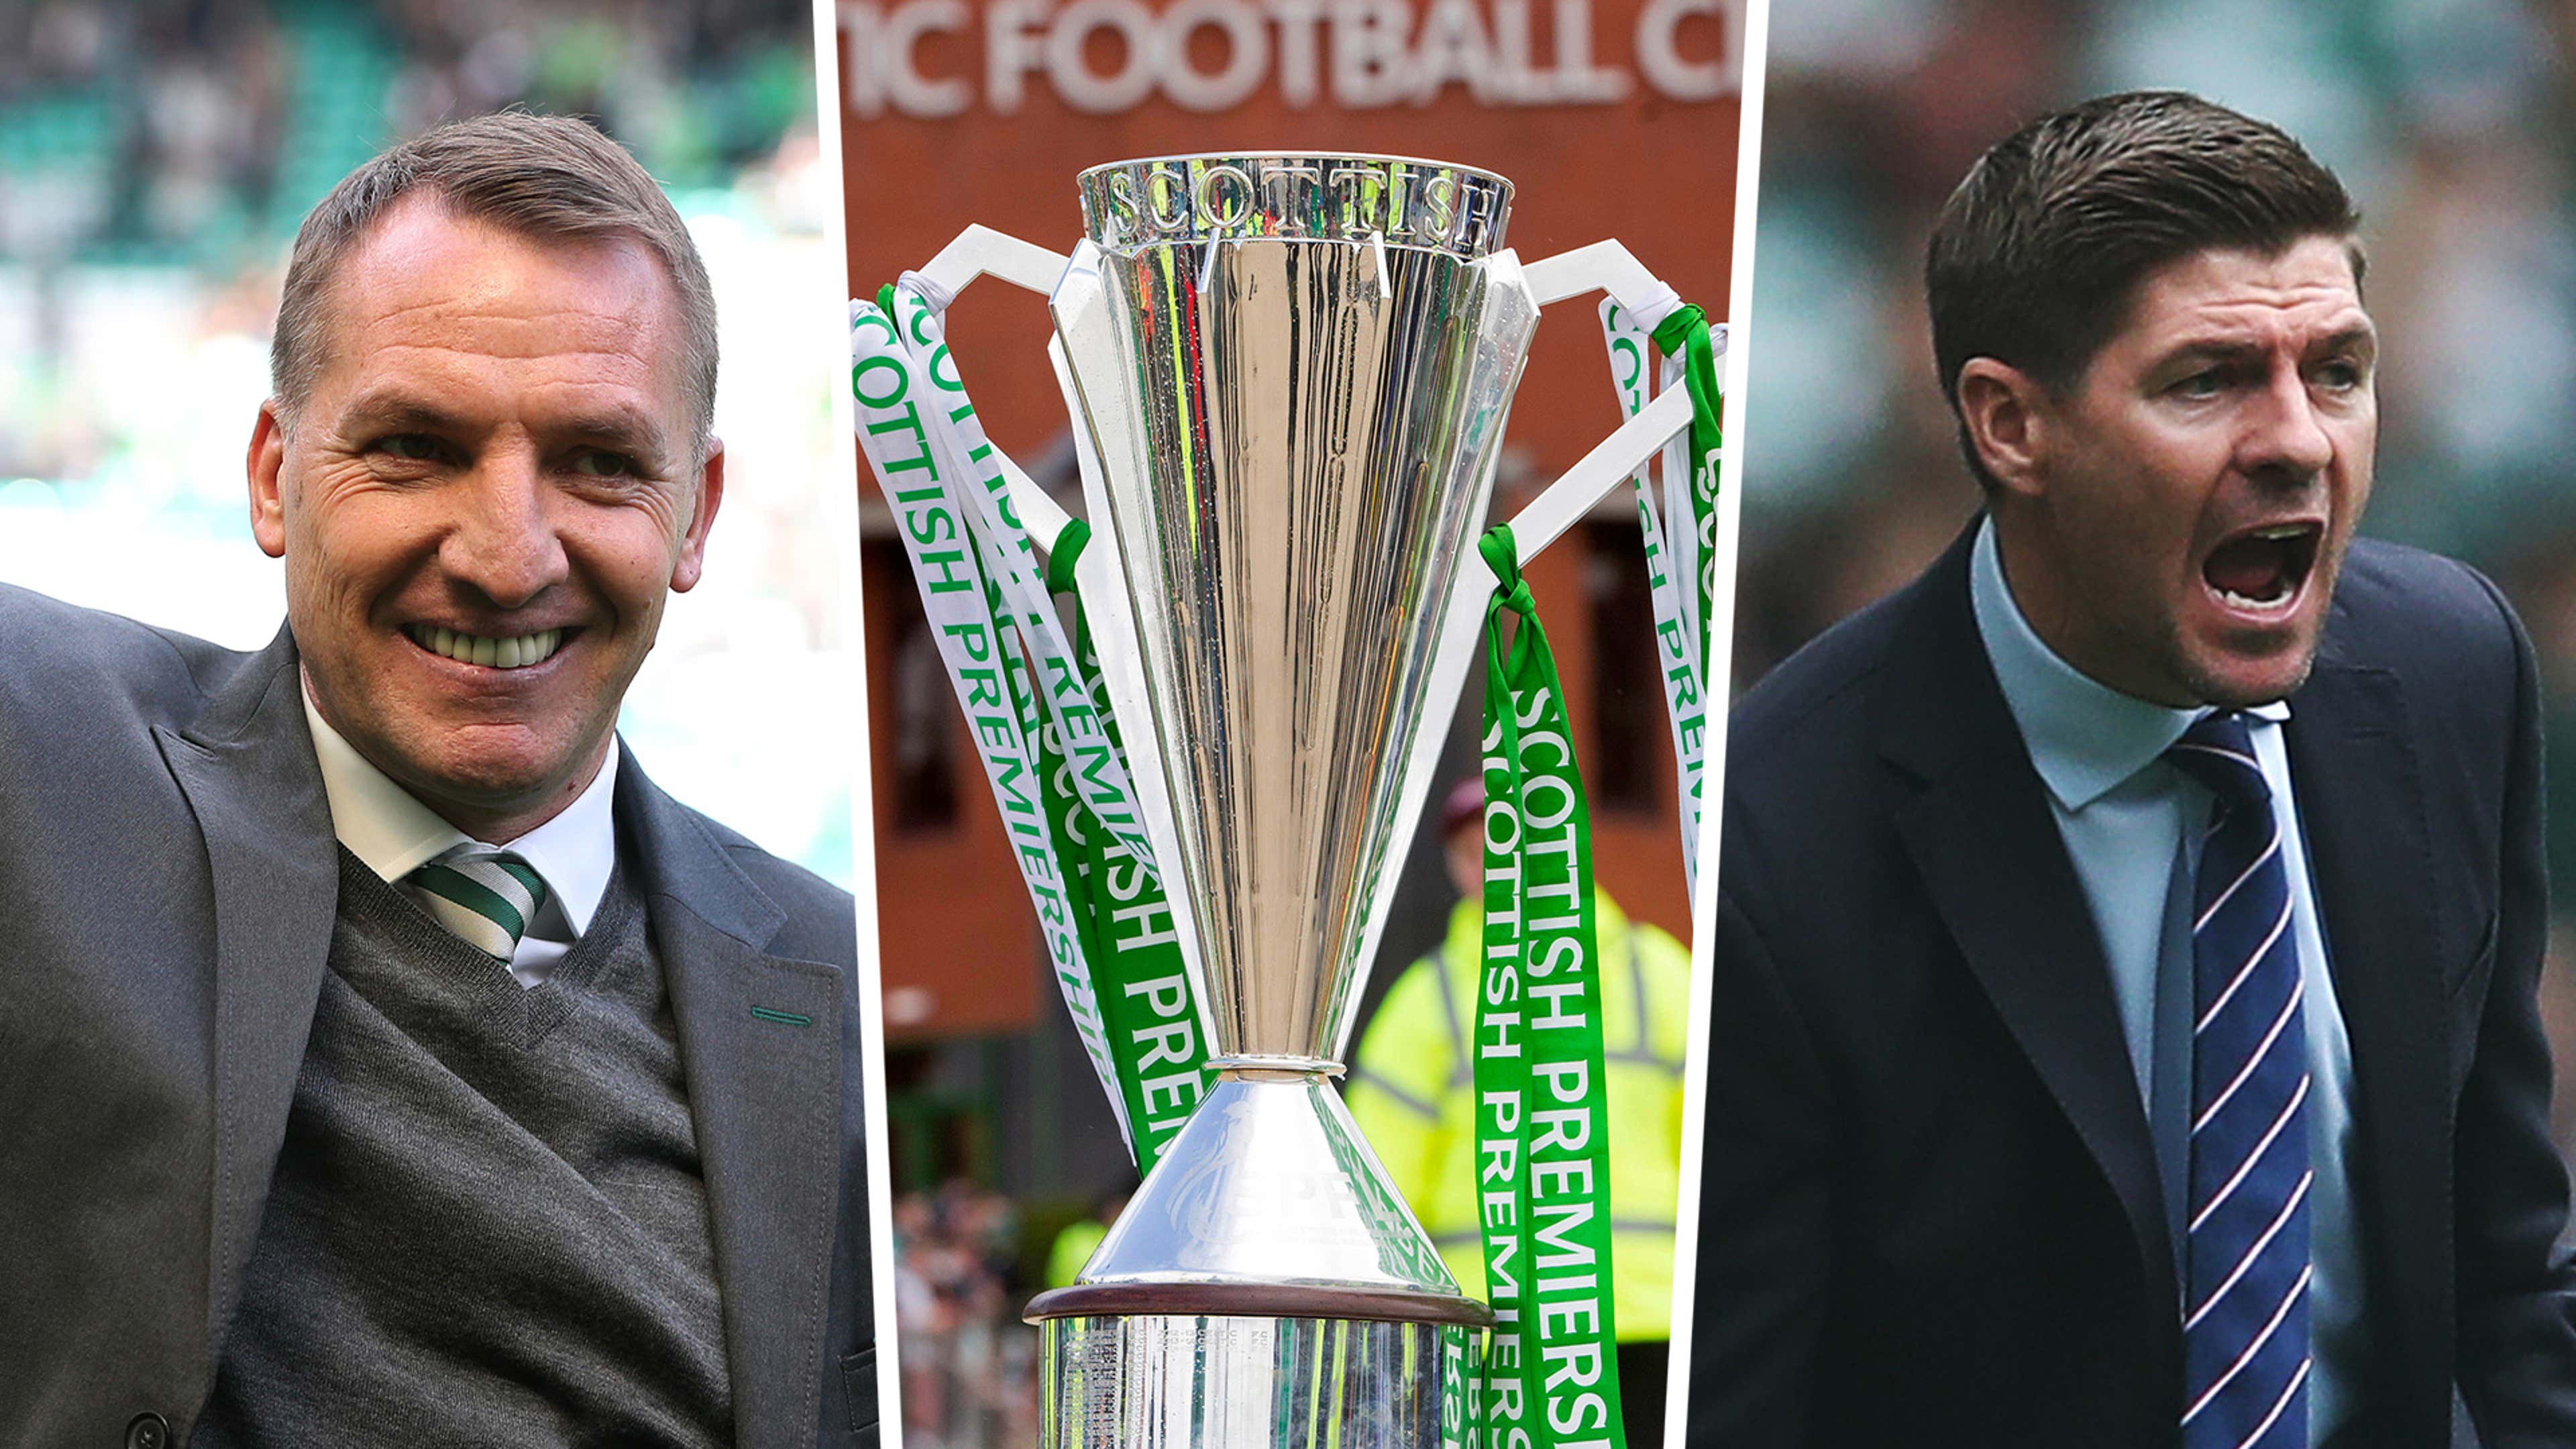 Celtic are crowned the Champions of Scotland